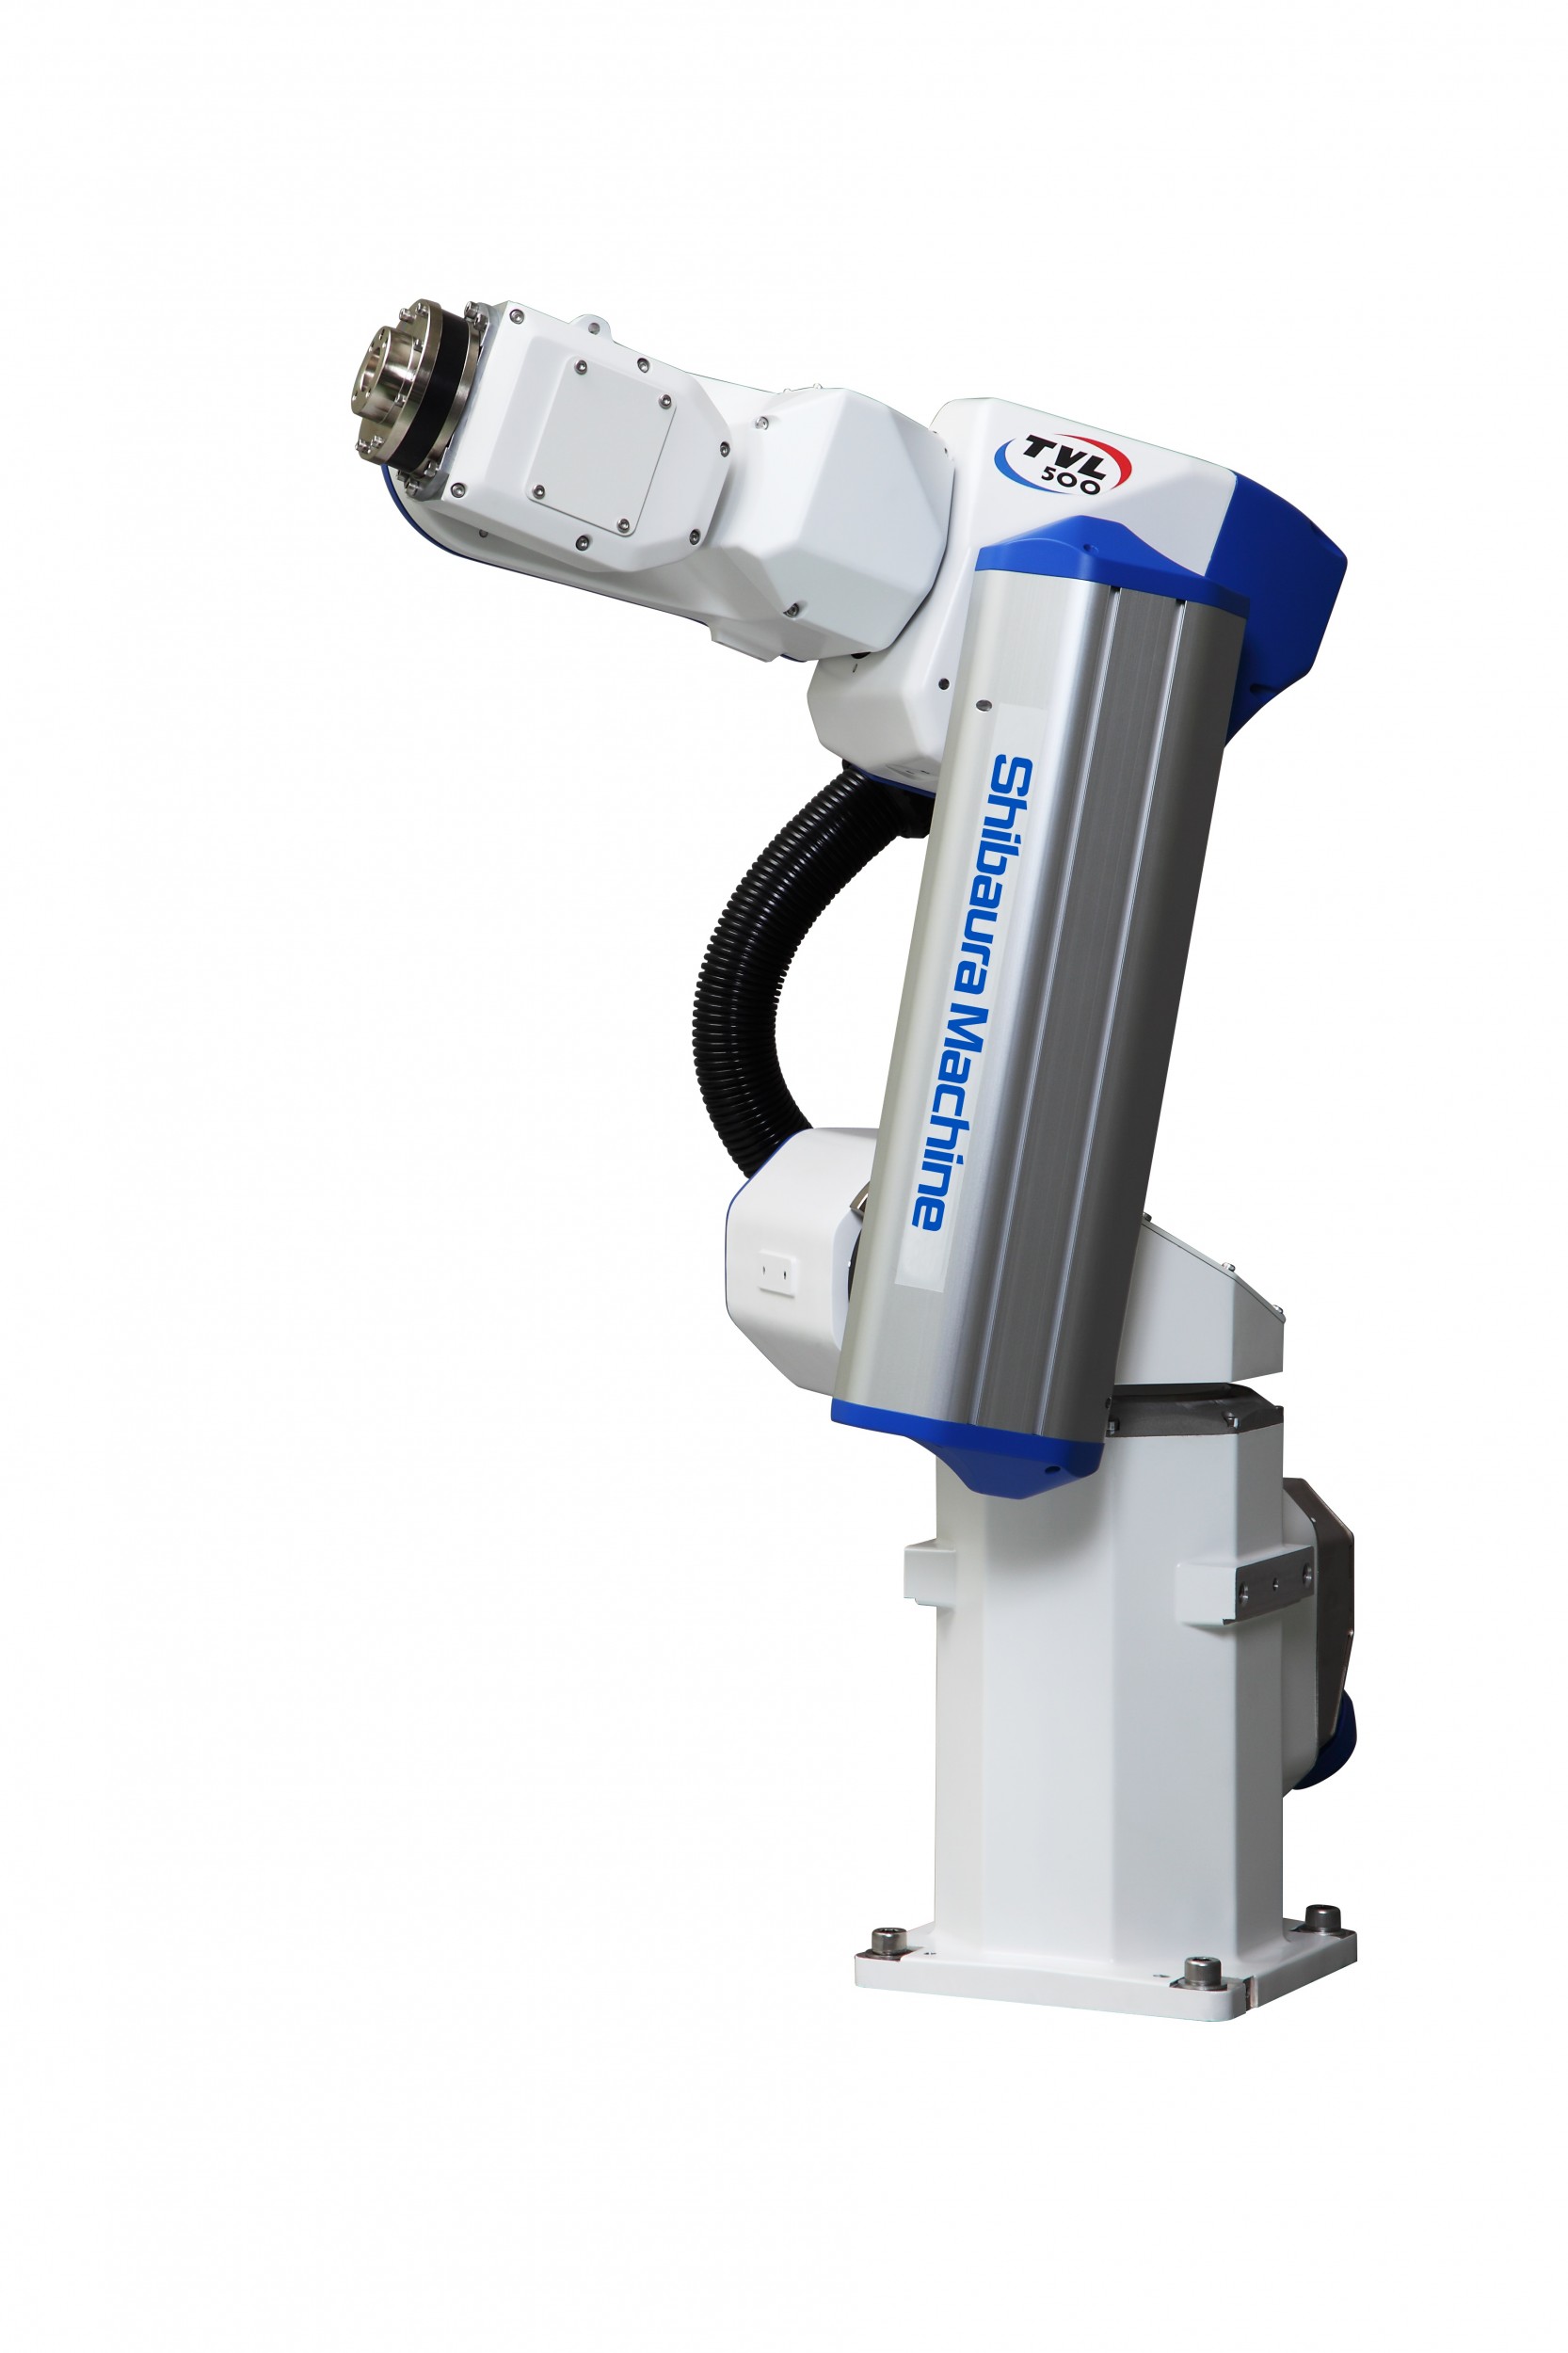 The TVL500 6-axis robot. An example of robots you can buy from Shibaura Machine. Features of industrial robots like the TVL500 include accuracy, flexibility and a small footprint.